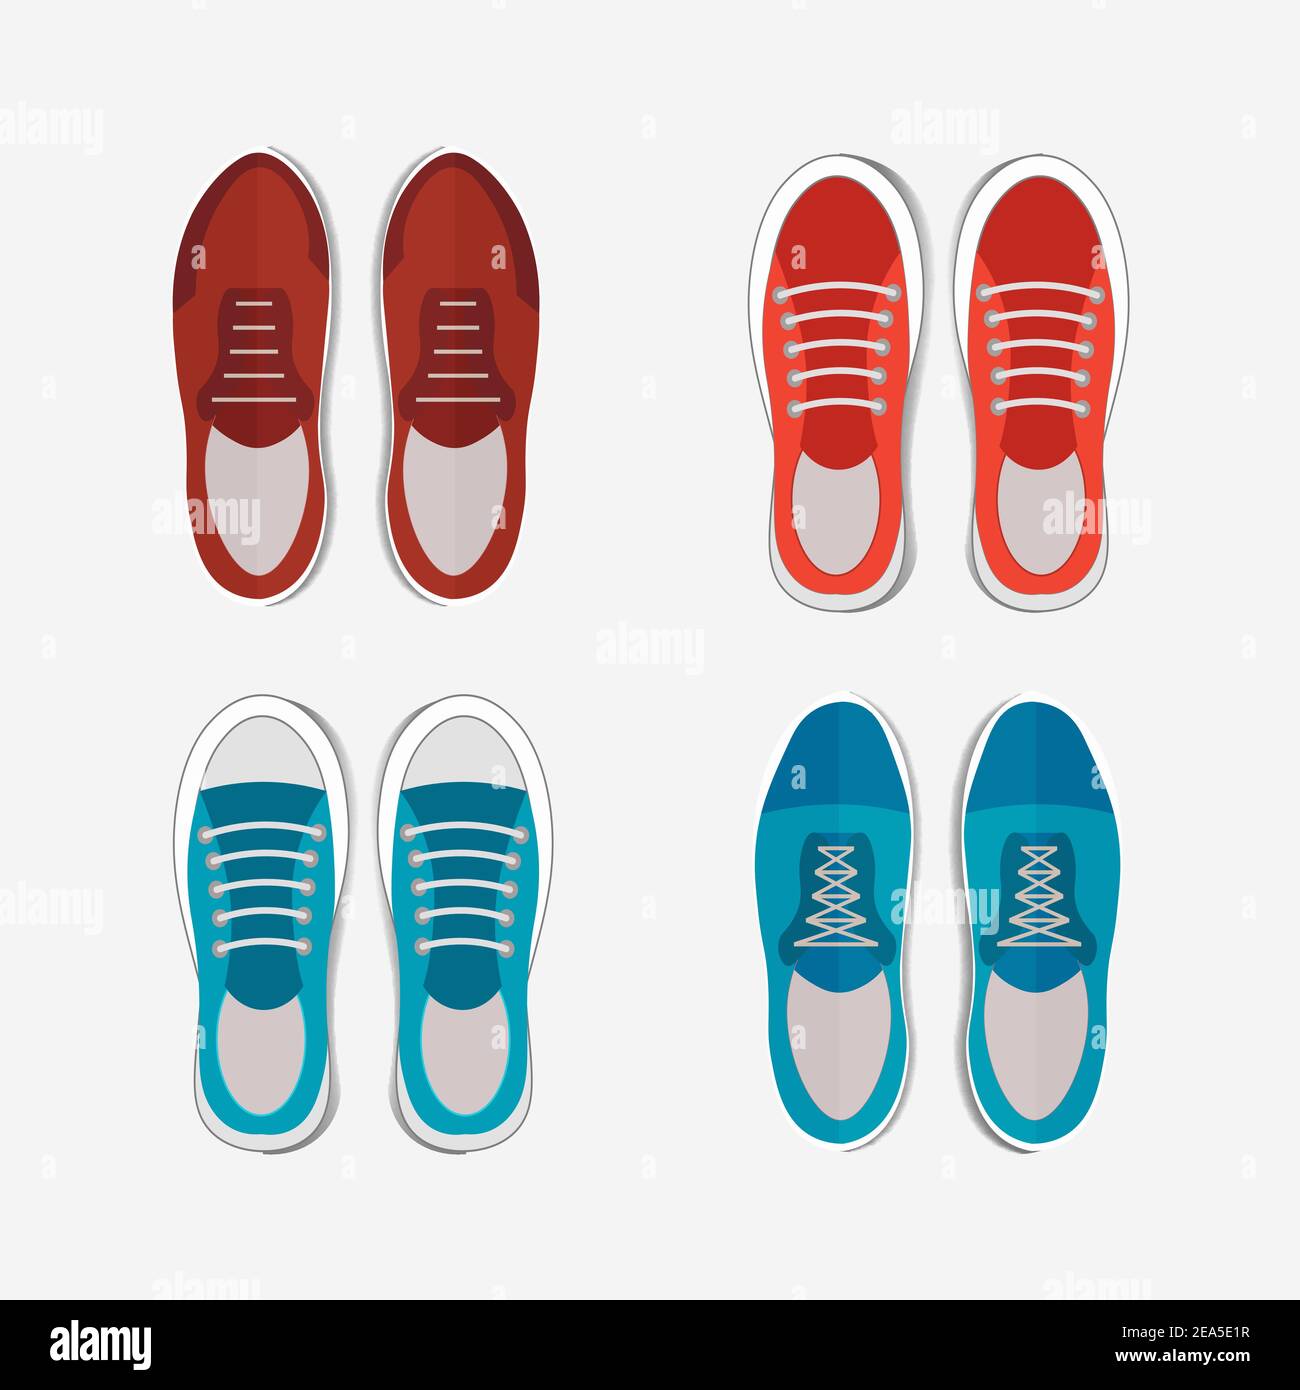 Men shoes top view with blue and red colors Stock Vector